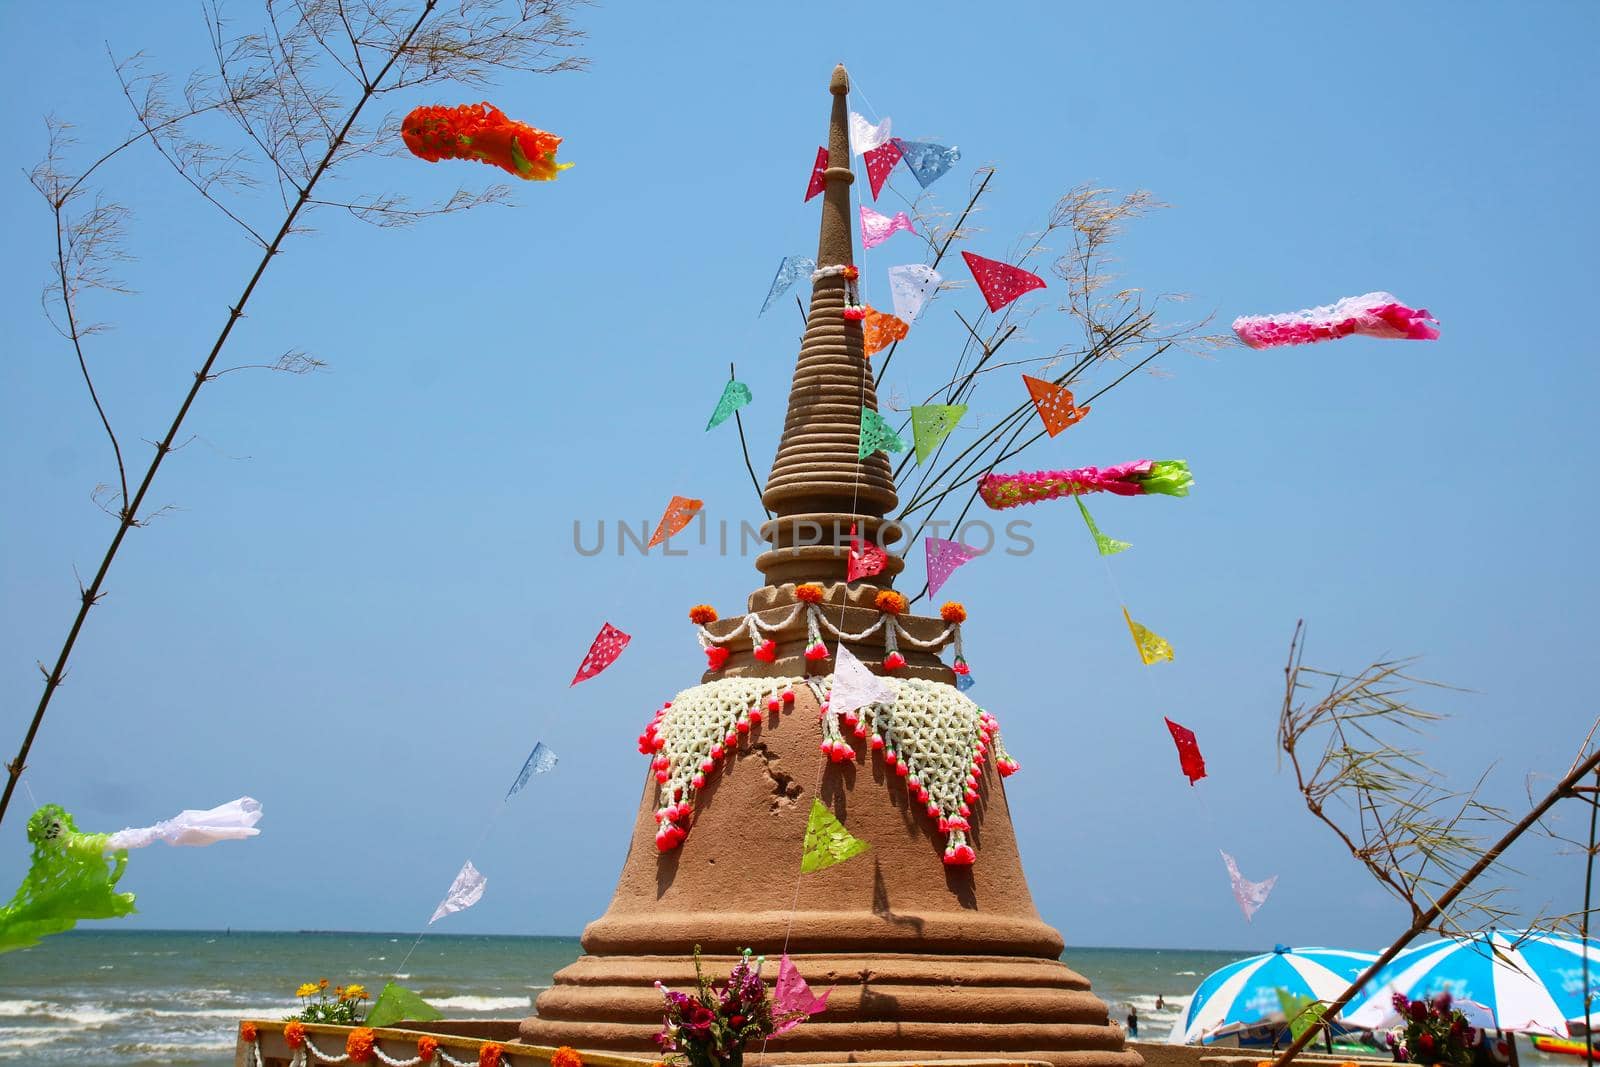 Giant sand pagoda and flags was carefully built, and beautifully decorated in Songkran festival by Darkfox